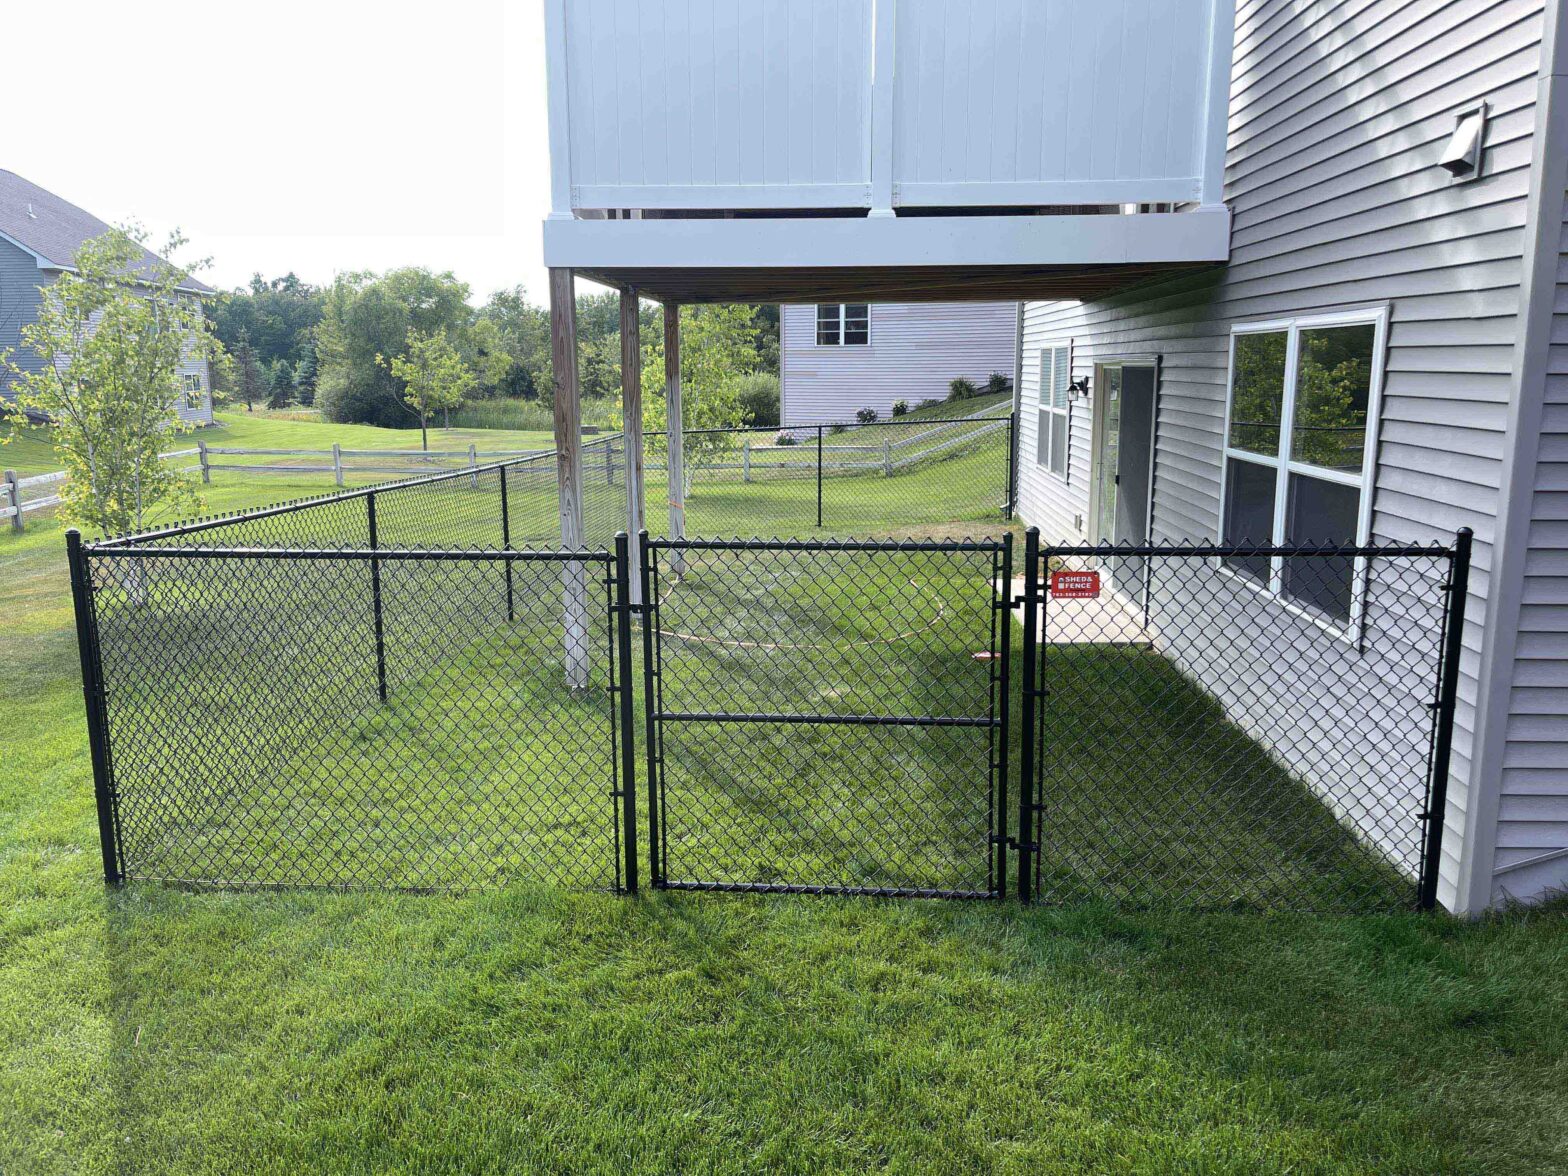 Photo of chain link fence in West Metro, Minnesota